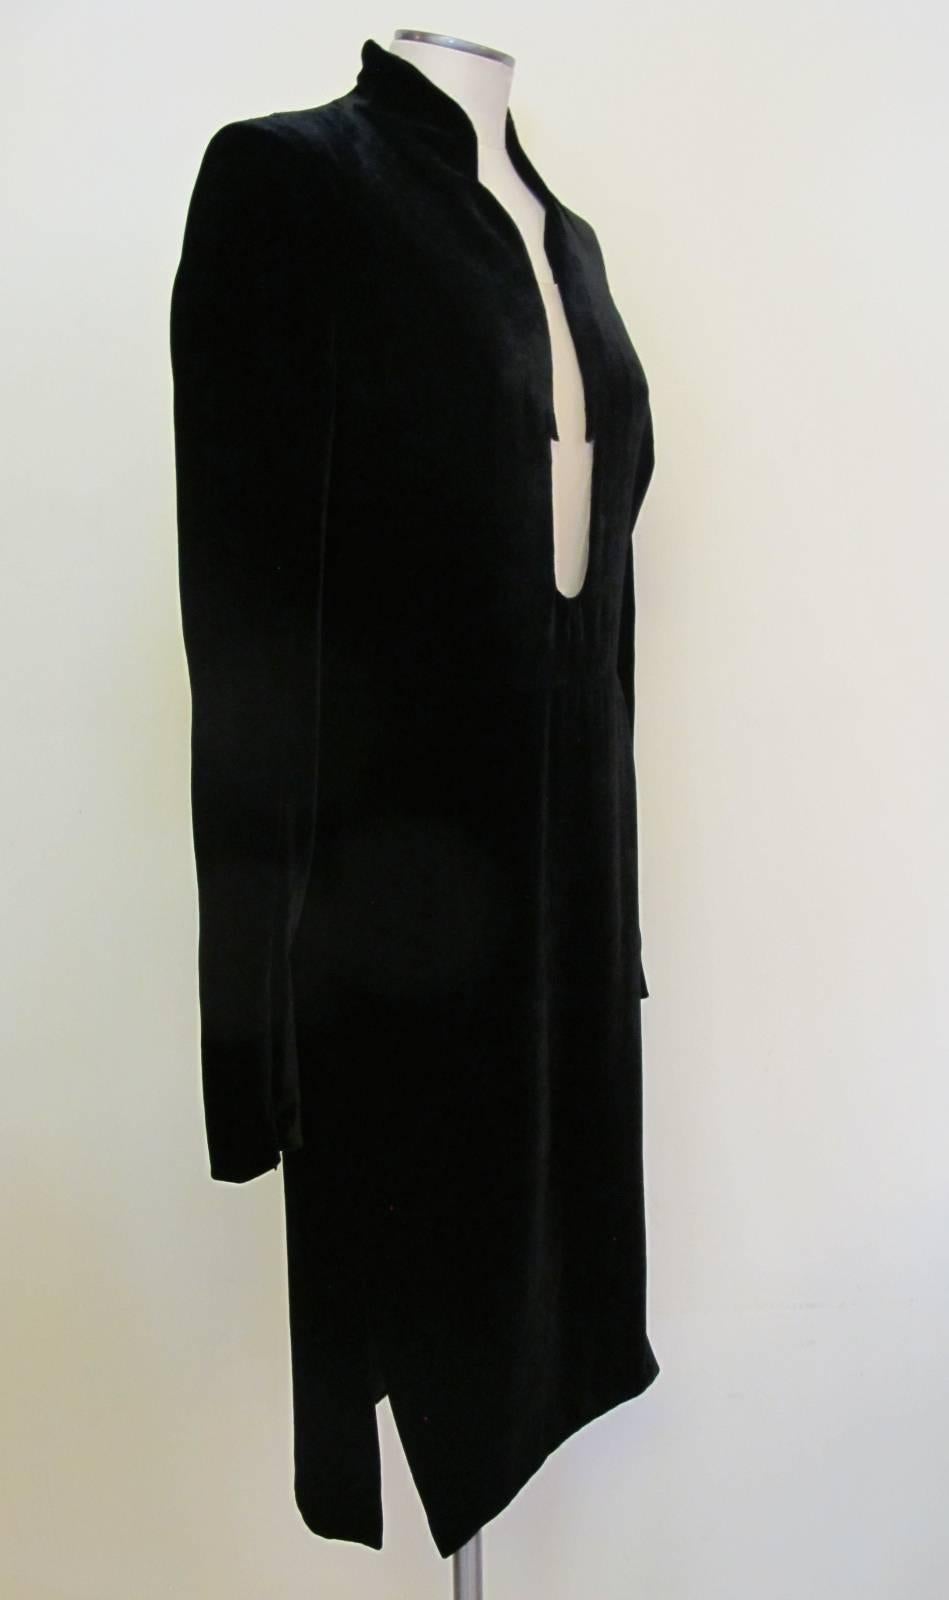 Elegant black velvet cocktail dress with flesh netting. There is a 19.5 inch drop in the back of the dress engaging the 